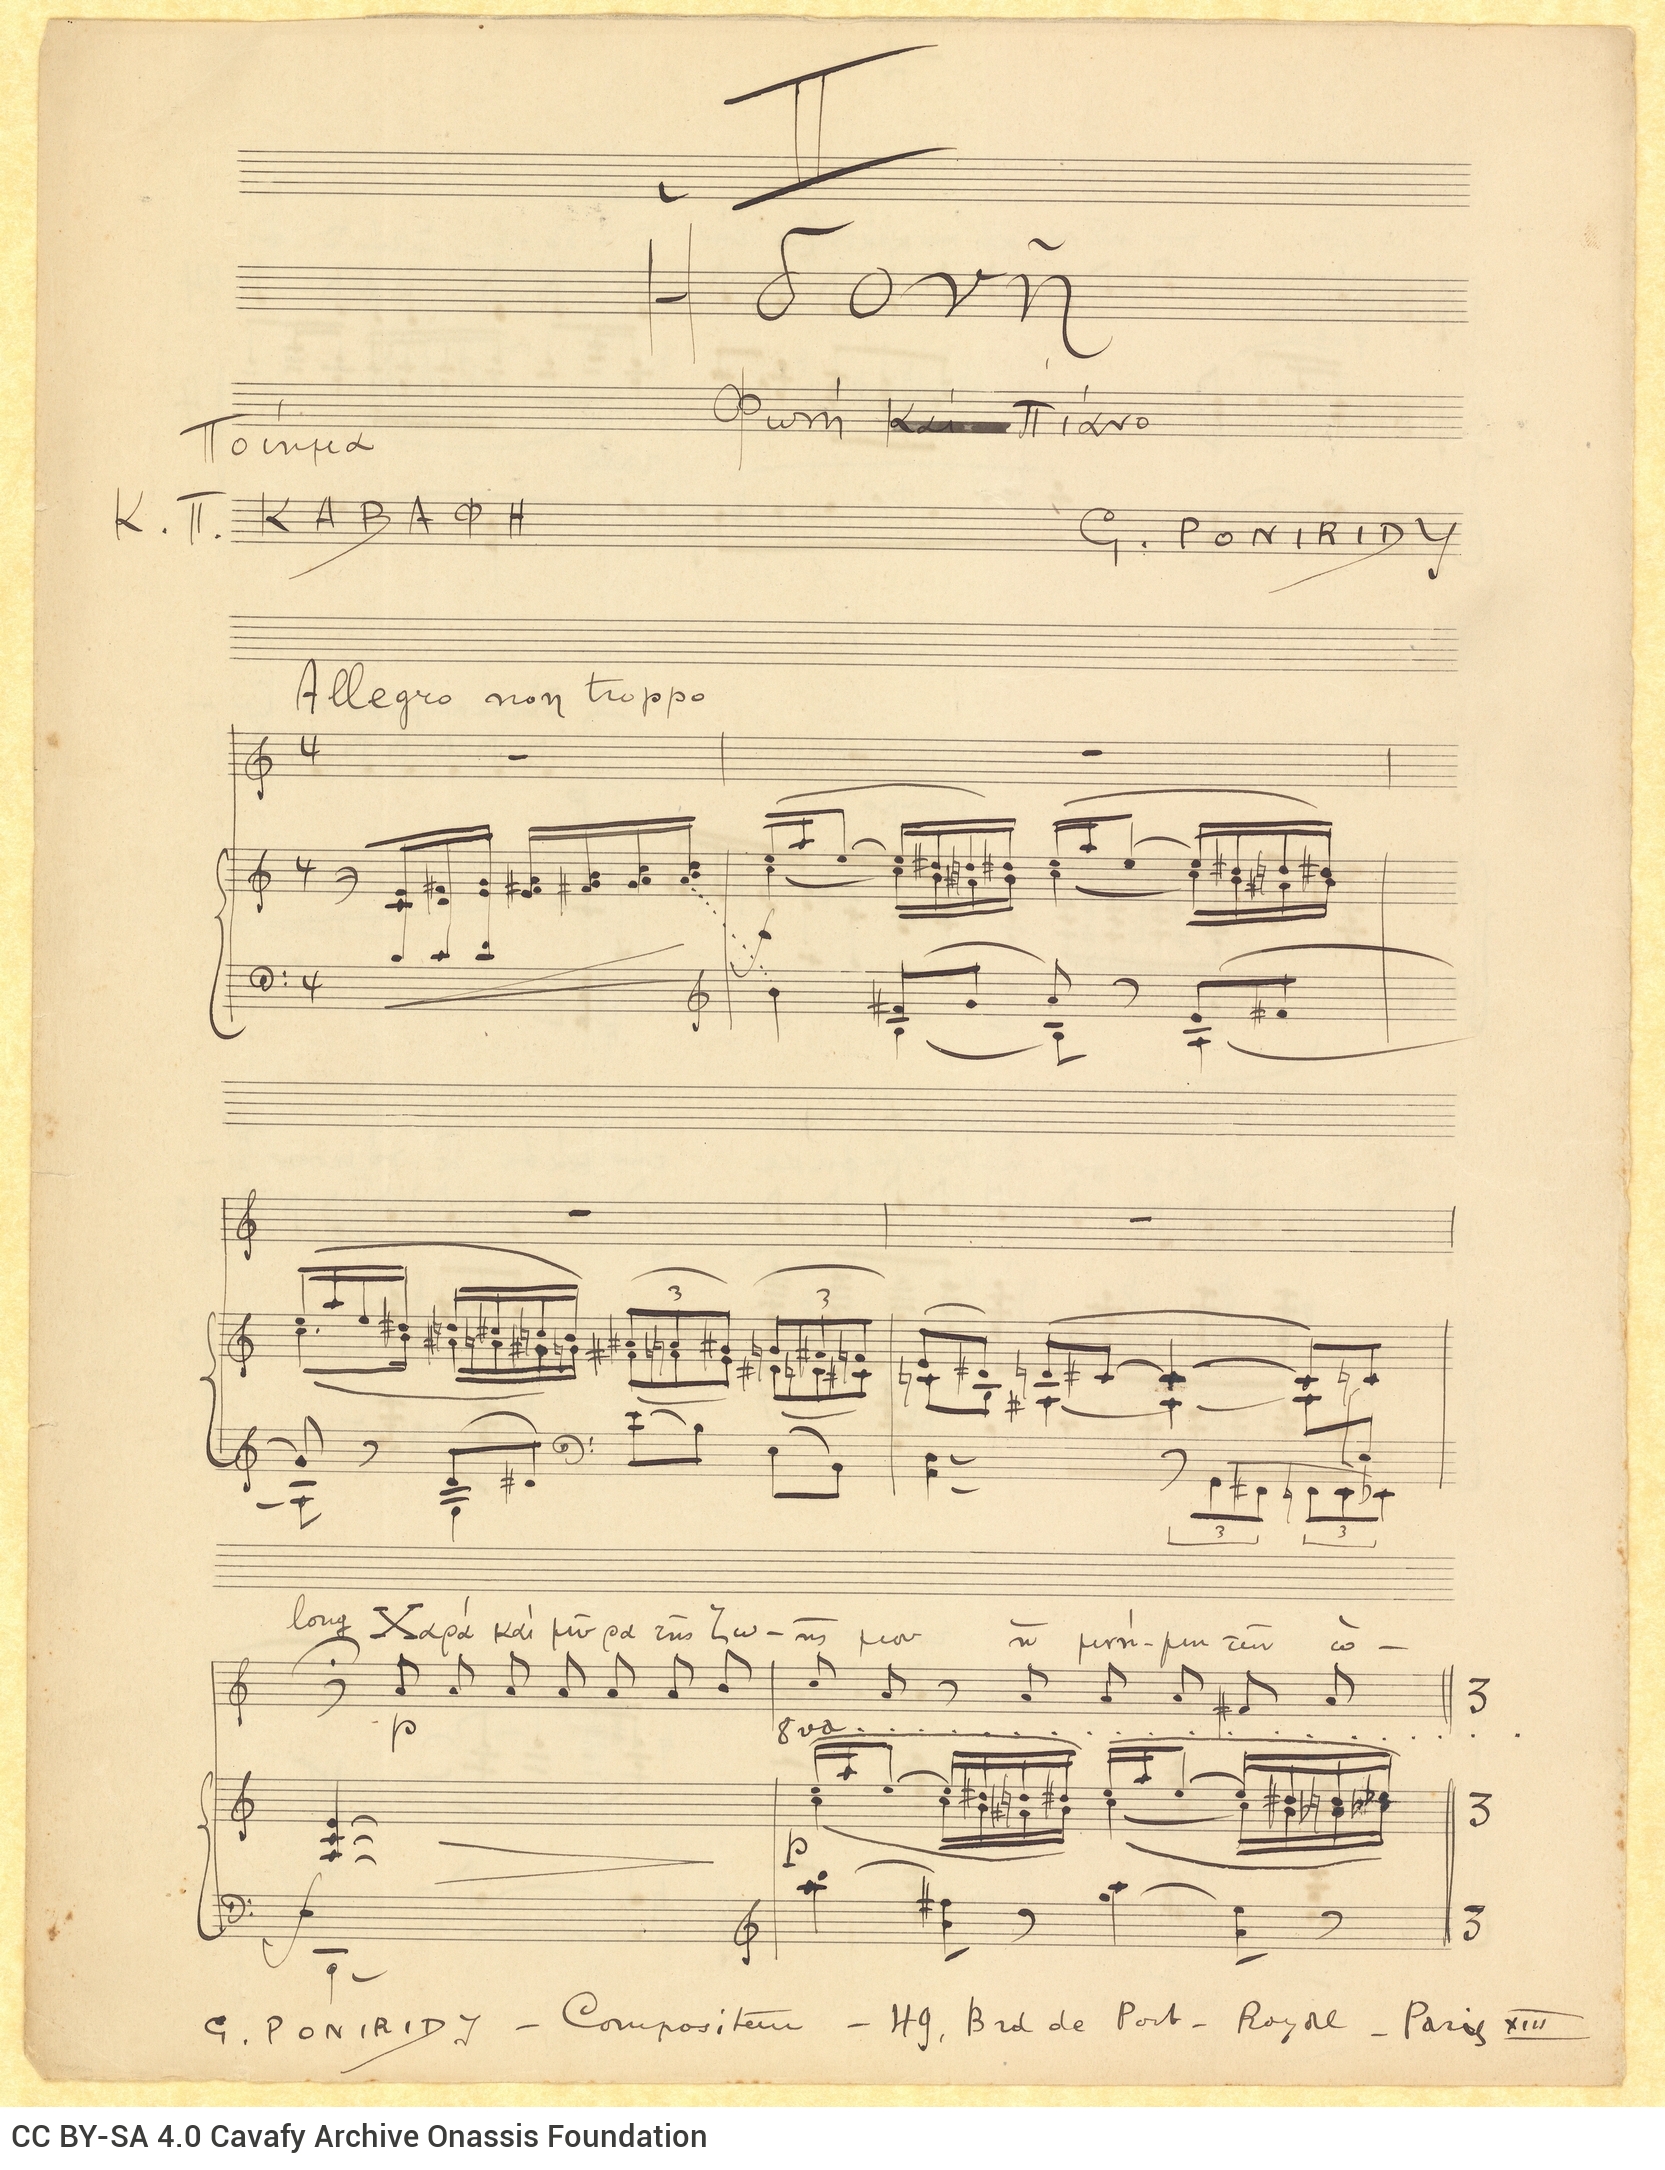 Handwritten musical score on both sides of a sheet. Composition for voice and piano, based on the poem "To Pleasure" by Ca